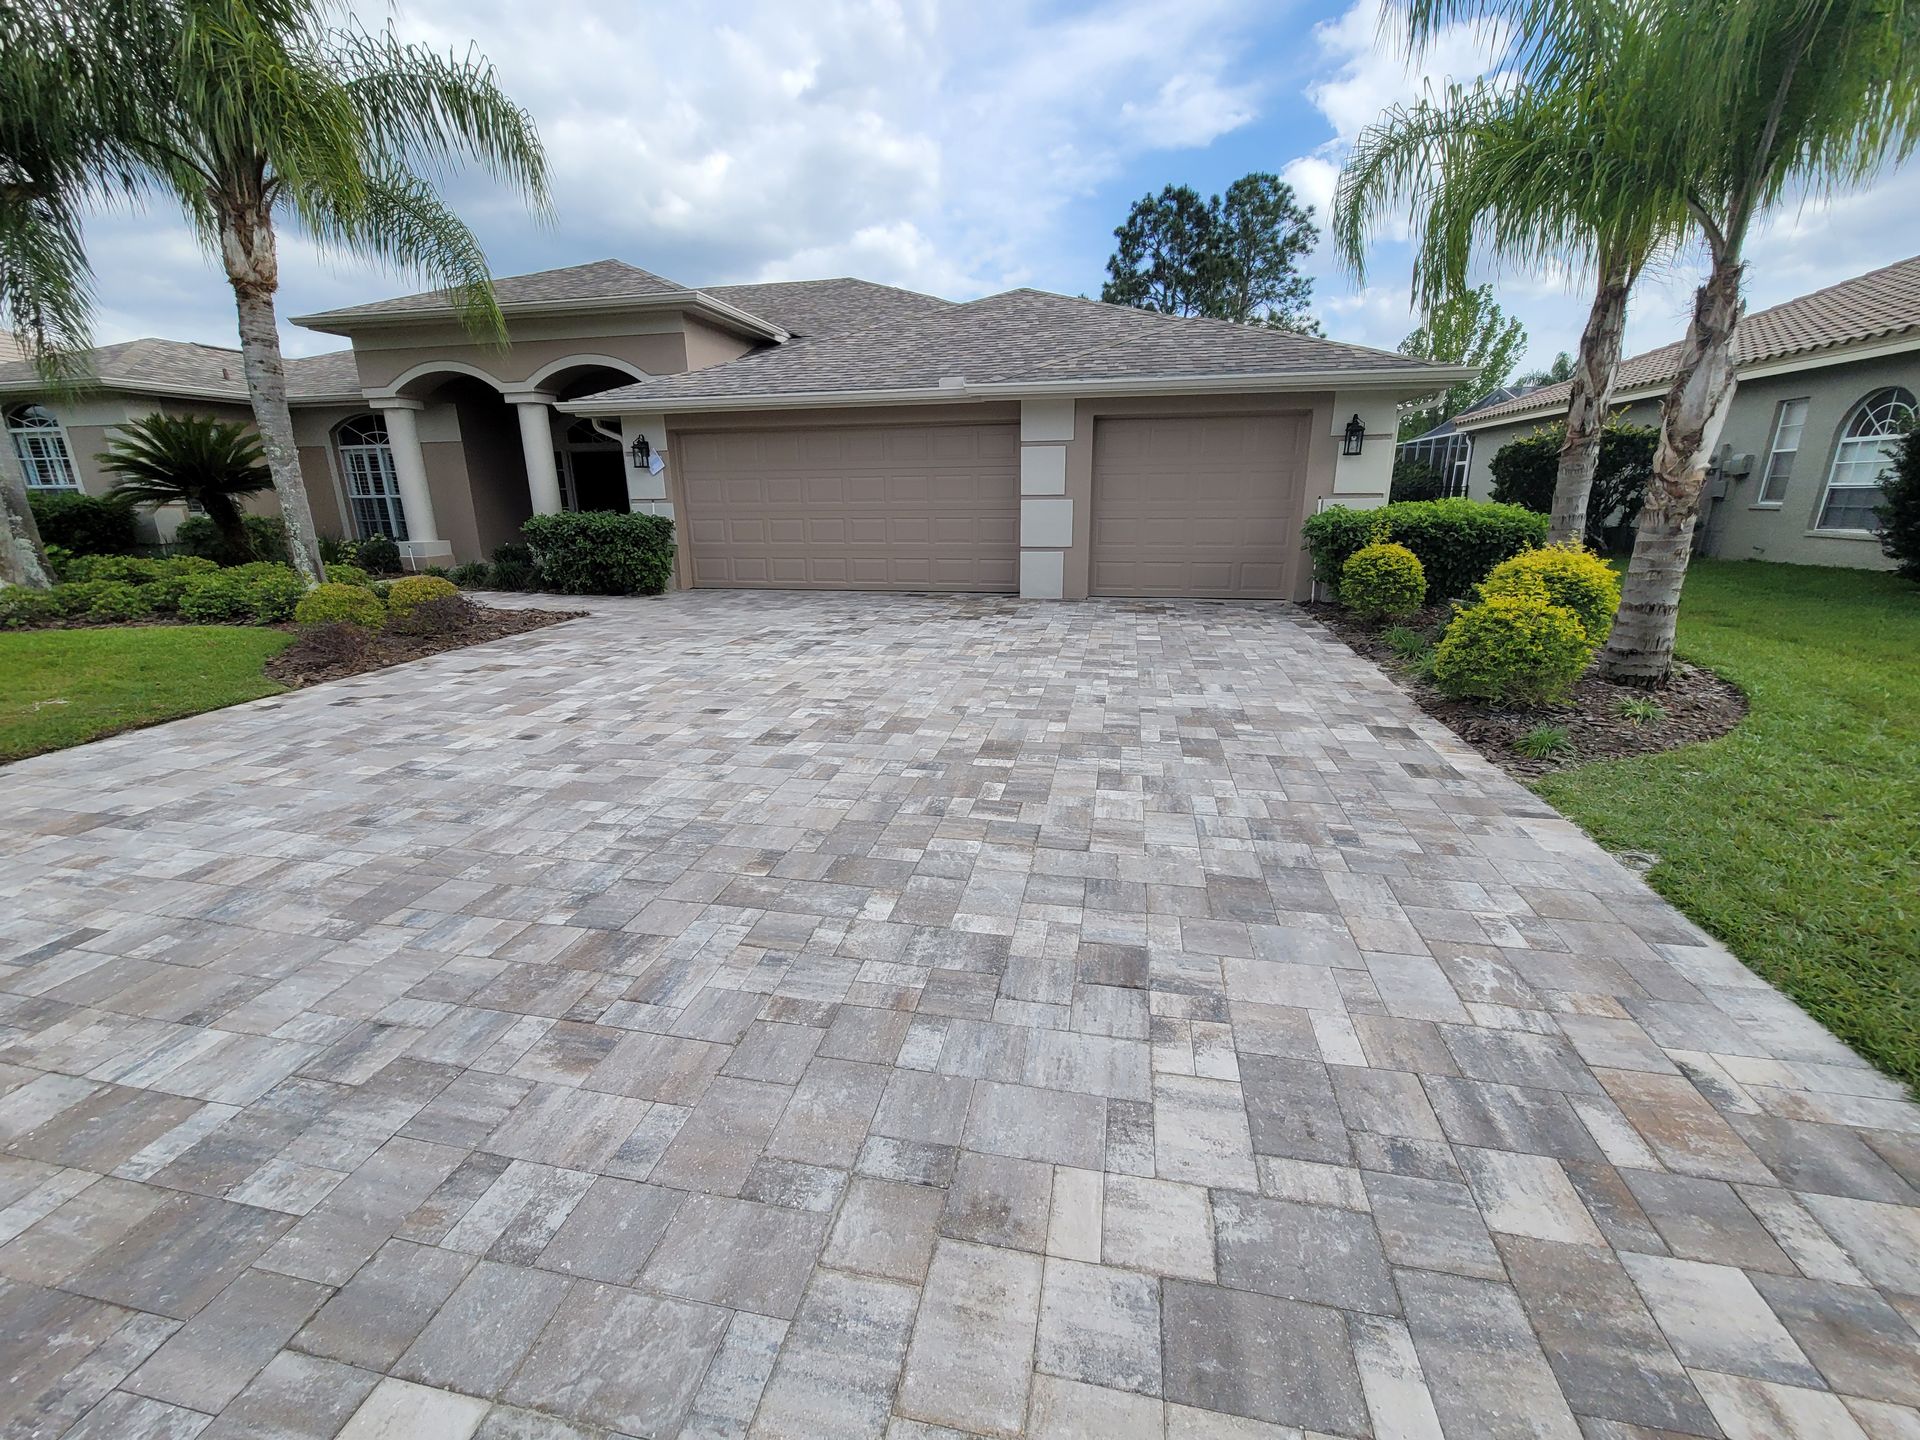 Flagstone - Heritage in White/Tan/Charcoal Brick Paver Driveway in Tampa, FL